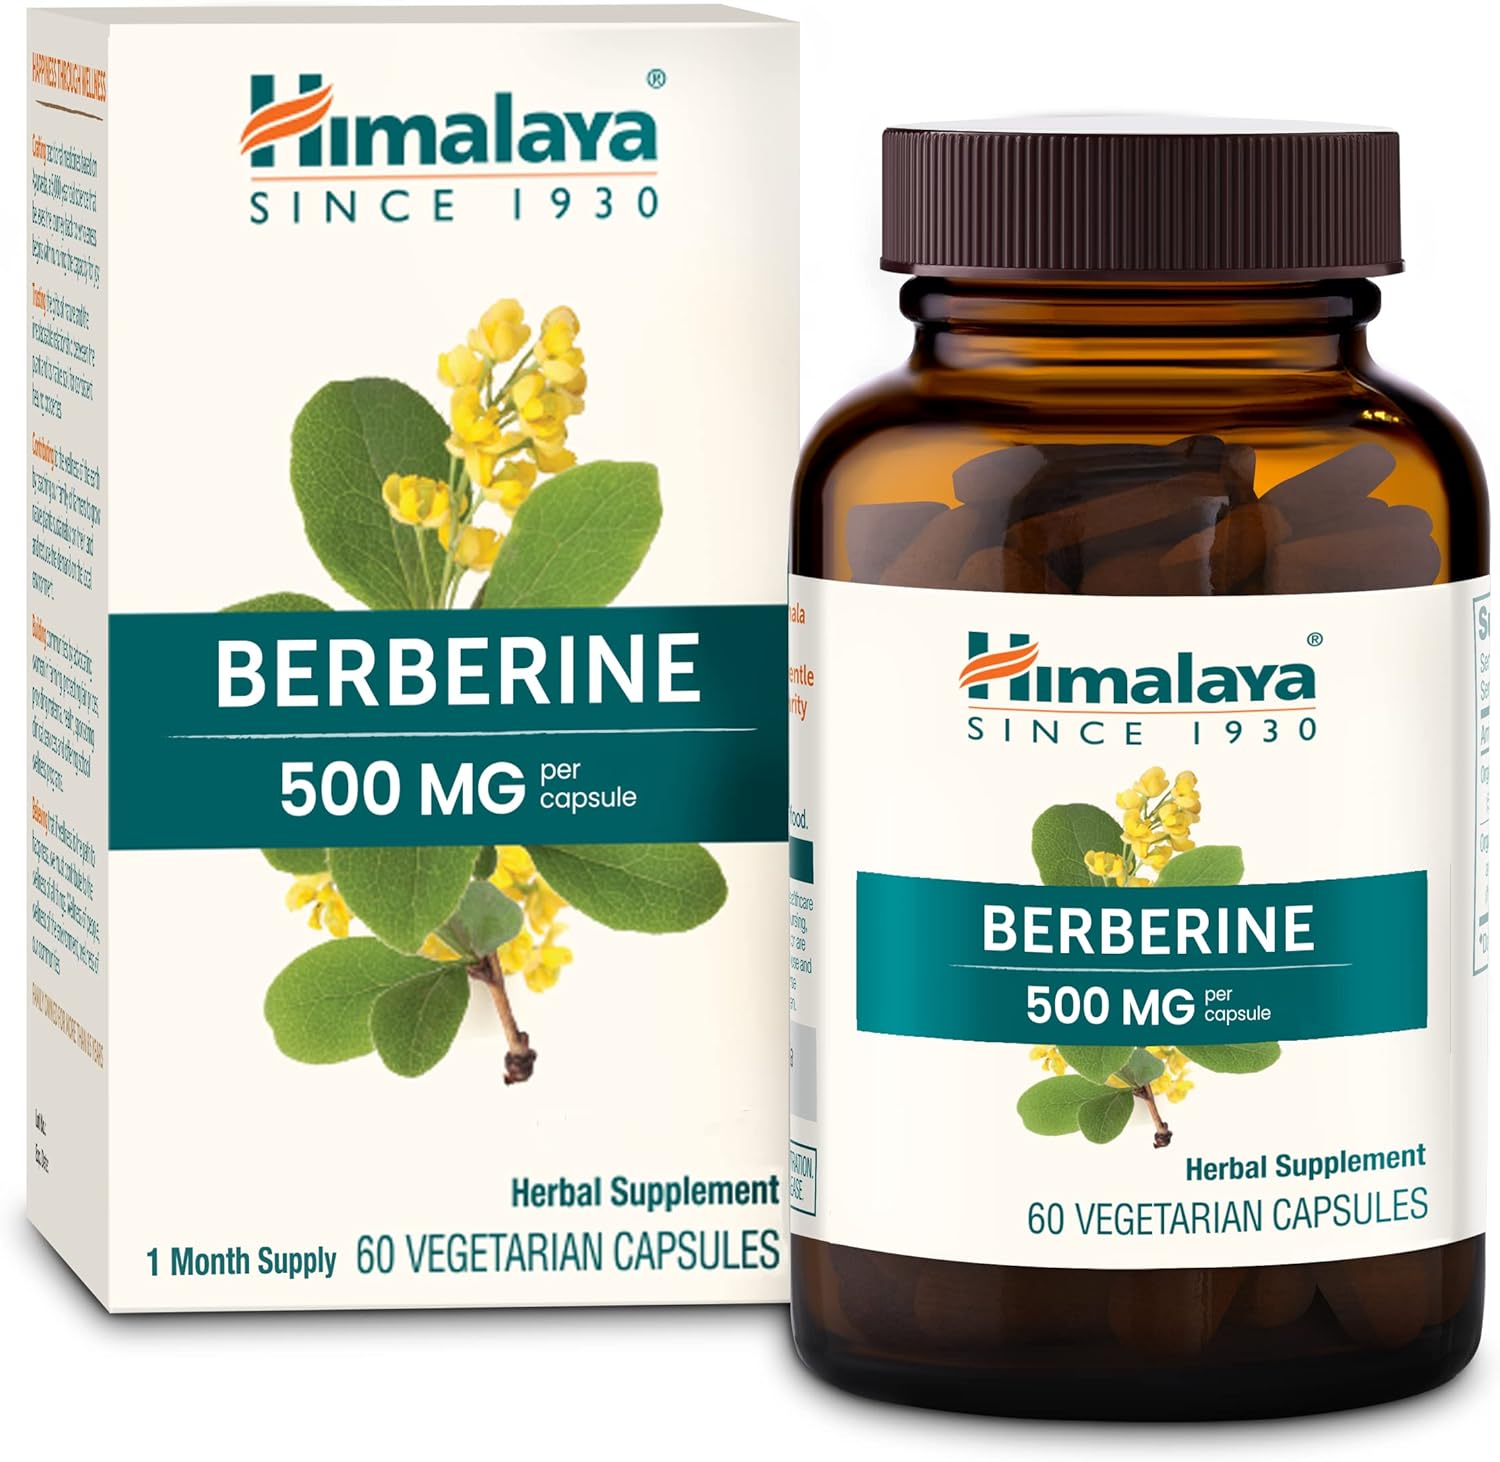 Himalaya Berberine for Metabolism & Cholesterol Support, GI Support & Immune Support, 1000 mg Serving, Berberine HCL from Indian Barberry Root, Vegan, Gluten Free, Herbal Supplement, 60 Capsules